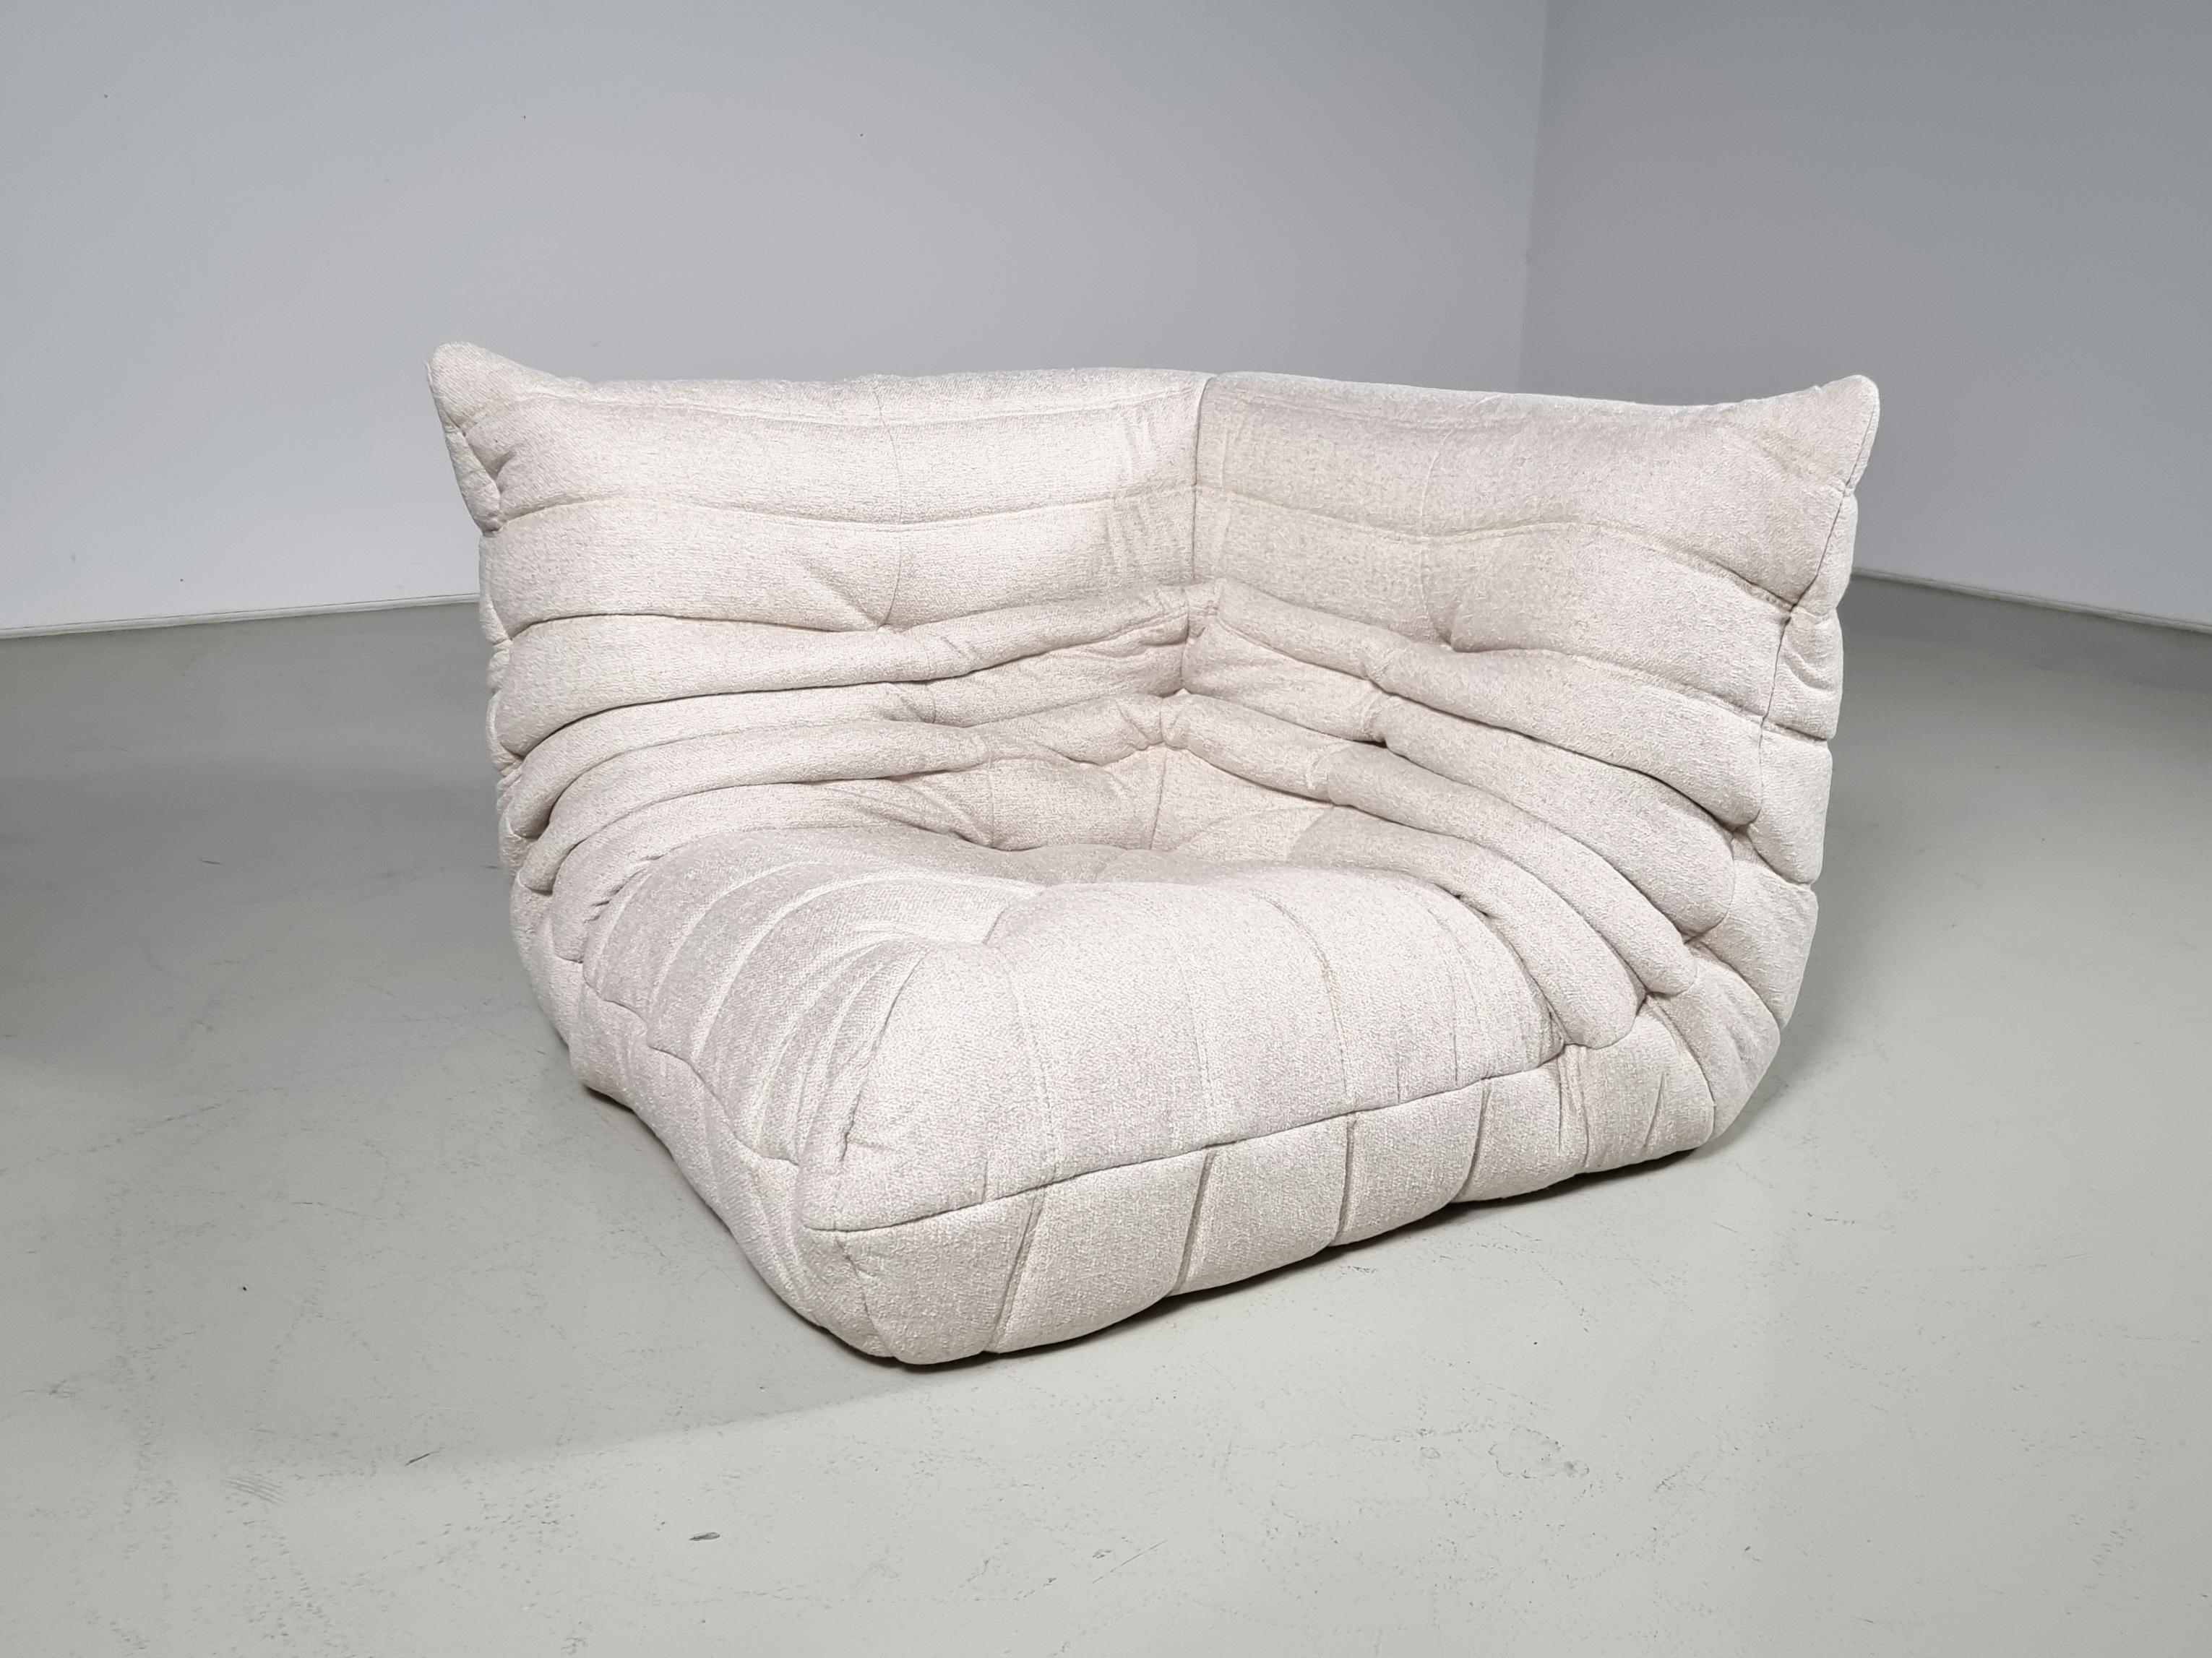 European Togo Lounge Chairin cream fabric by Michel Ducaroy for Ligne Roset, circa 1970s For Sale